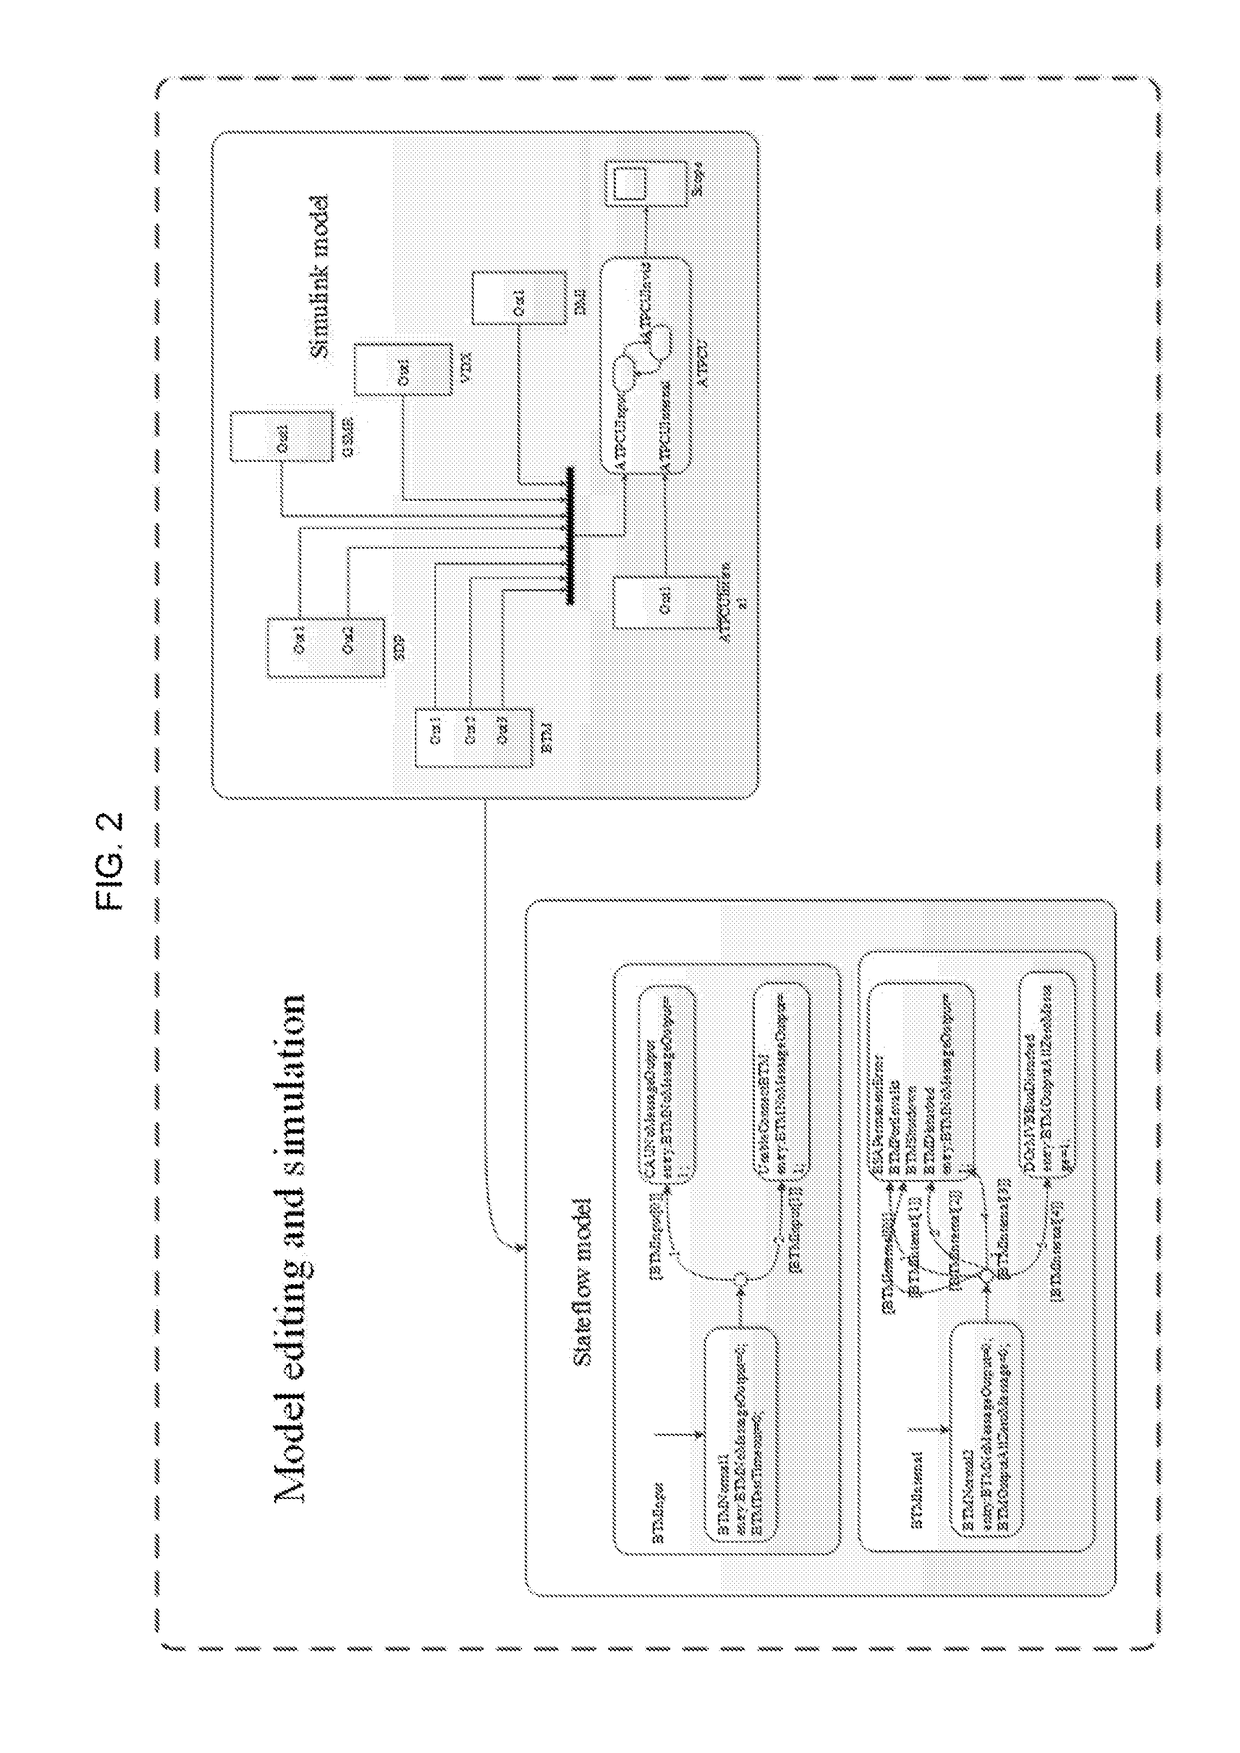 Failure  logic  modeling  method  for  a high-speed  railway  train operation control on-board system